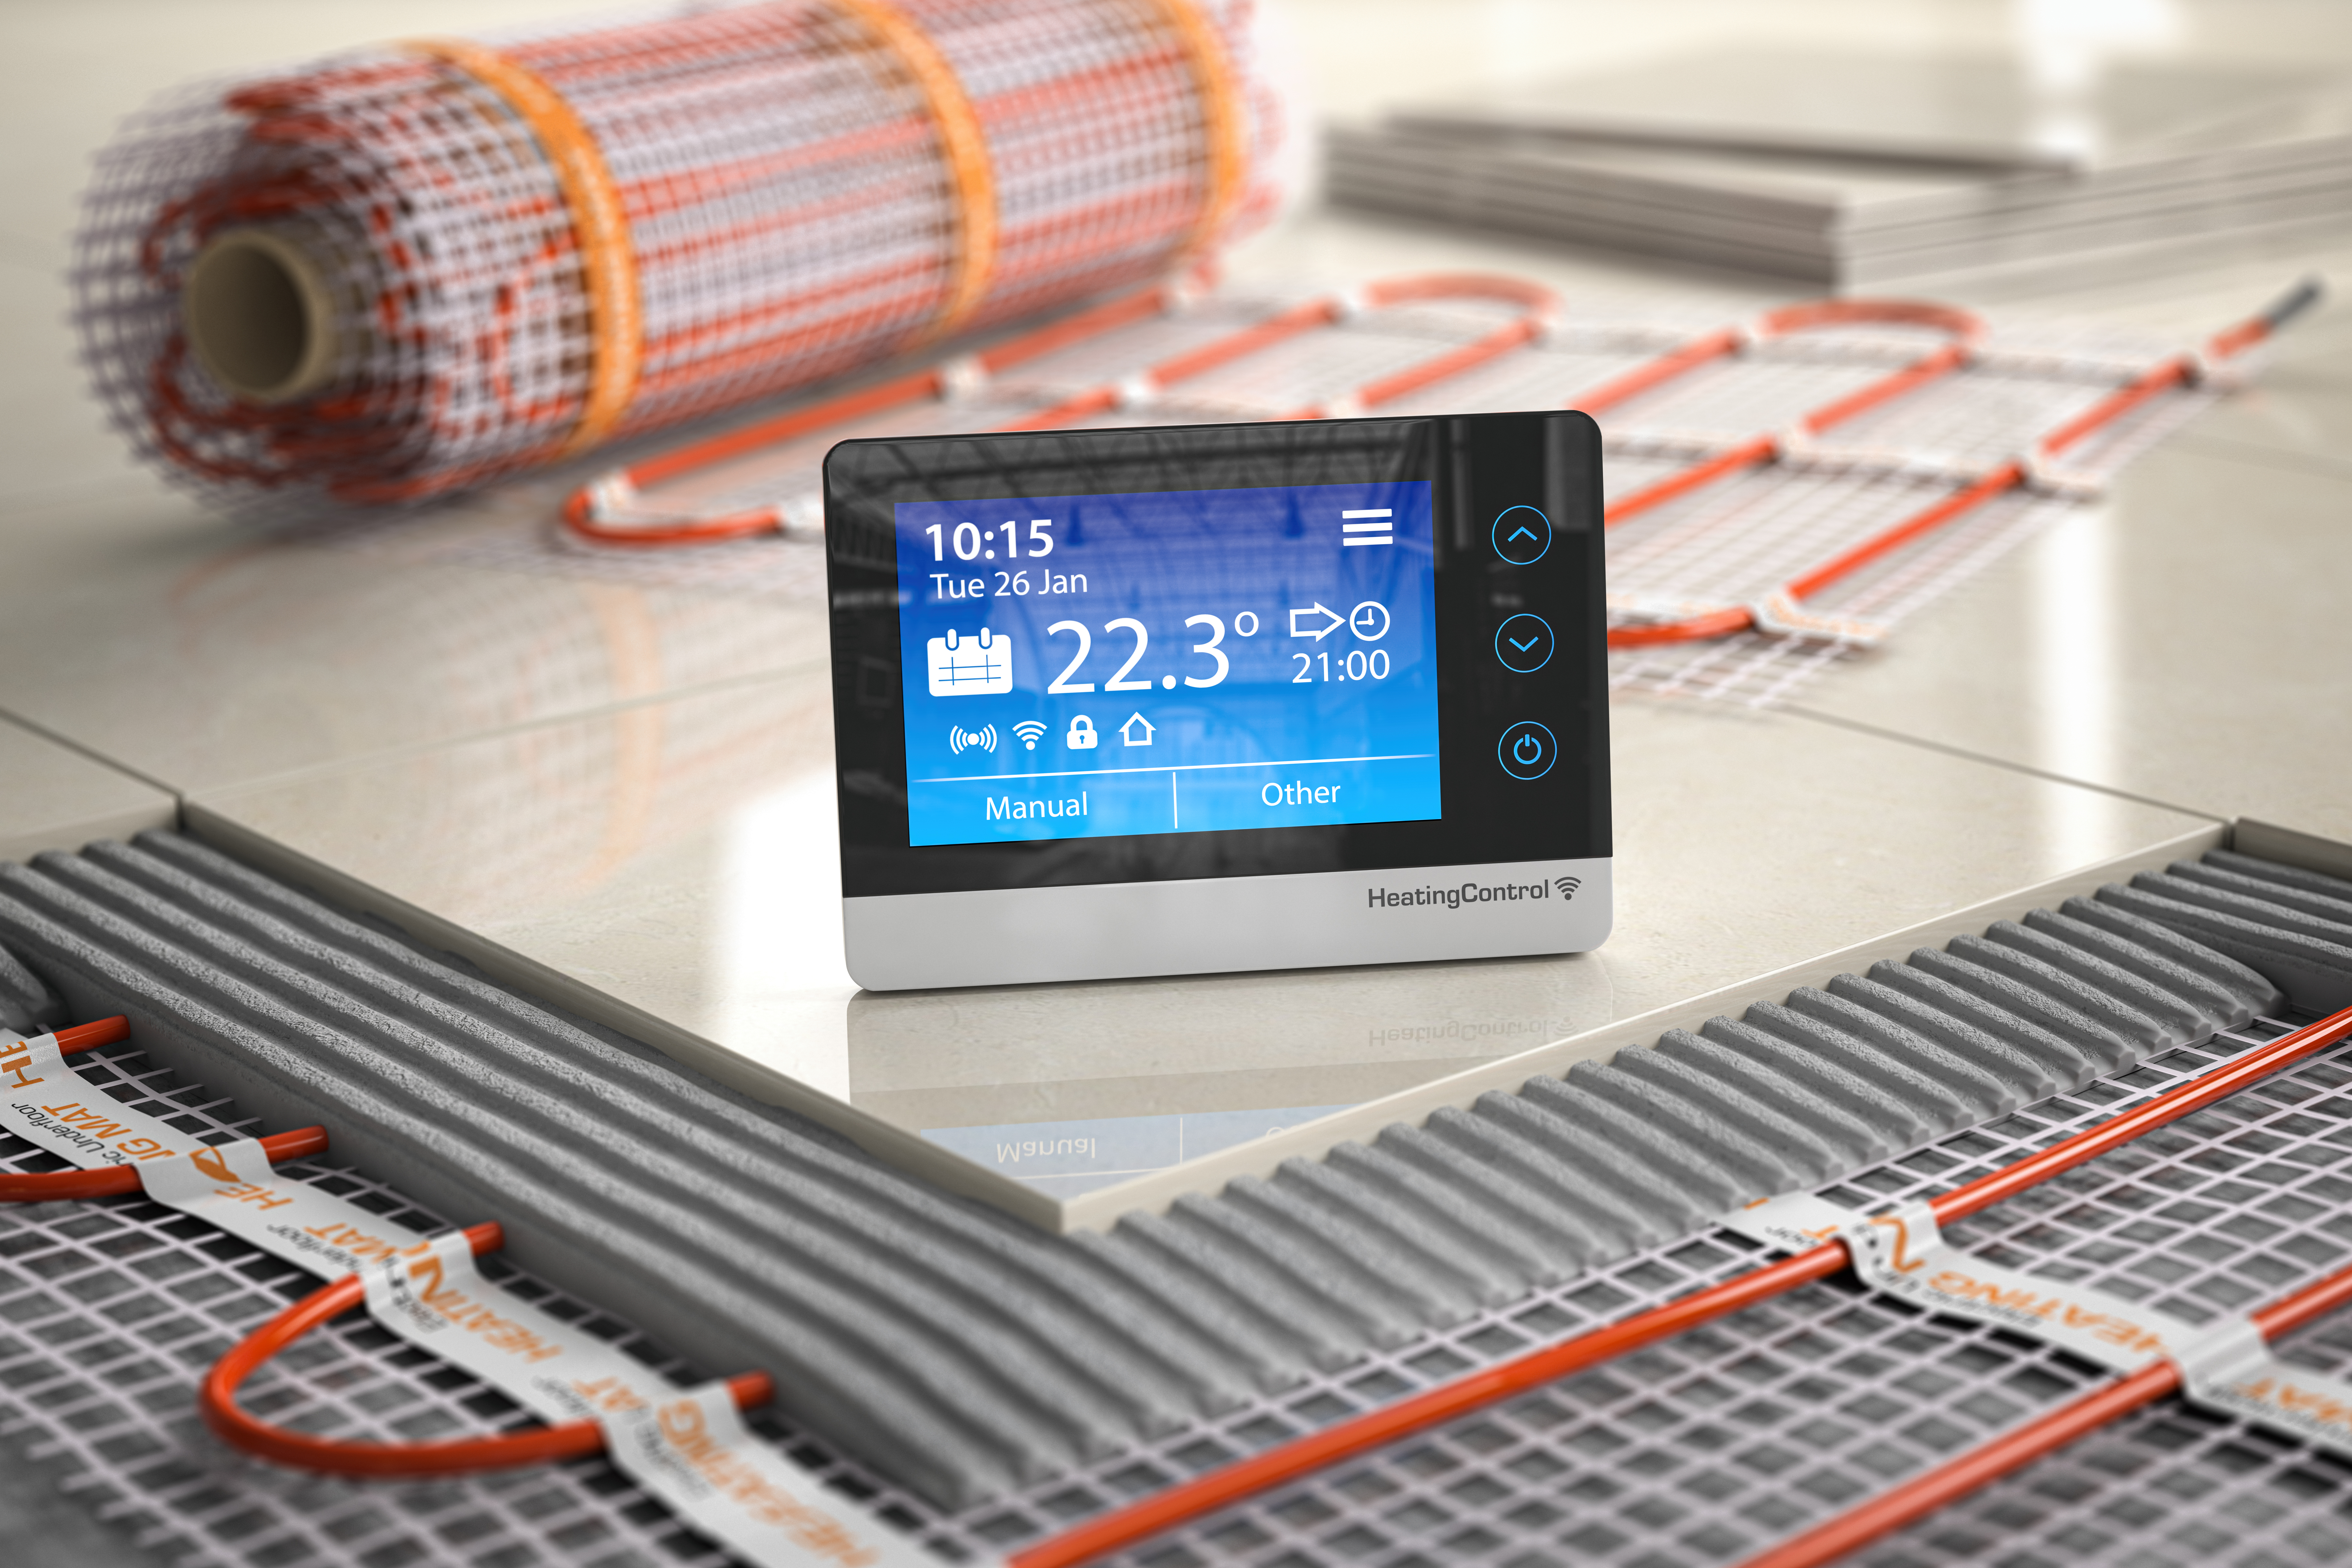 A detailed photograph of an underfloor heating system, showcasing a thermostat or climate control unit, an electric heating mat, and the layers of a floor construction, including ceramic tiles and cement, highlighting the components and installation of the system